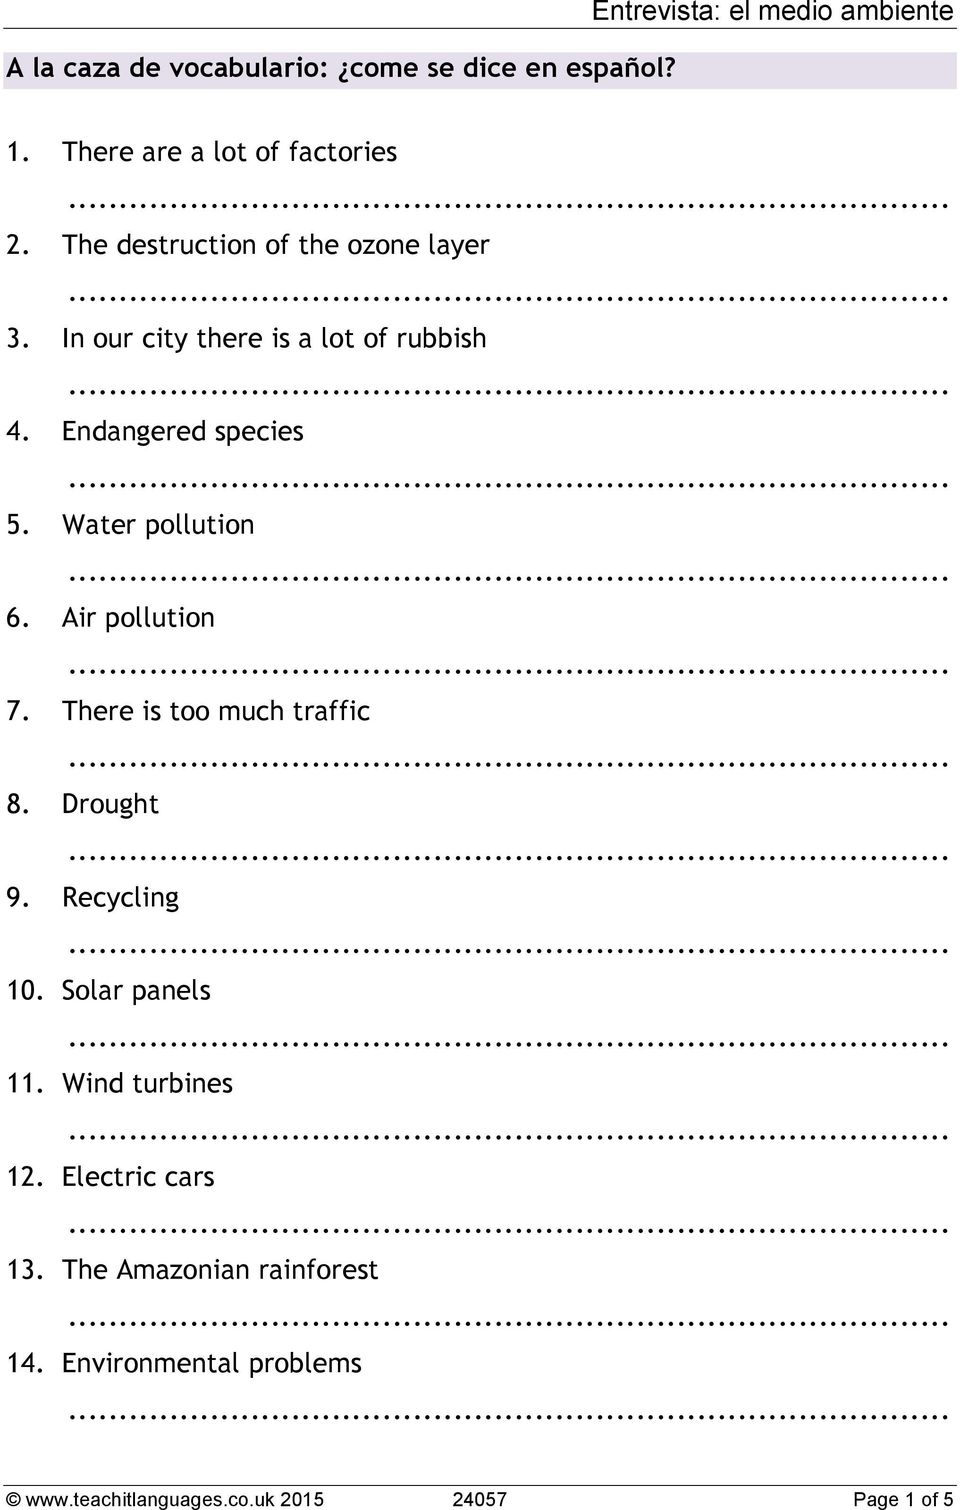 Water pollution 6. Air pollution 7. There is too much traffic 8. Drought 9. Recycling 10. Solar panels 11.